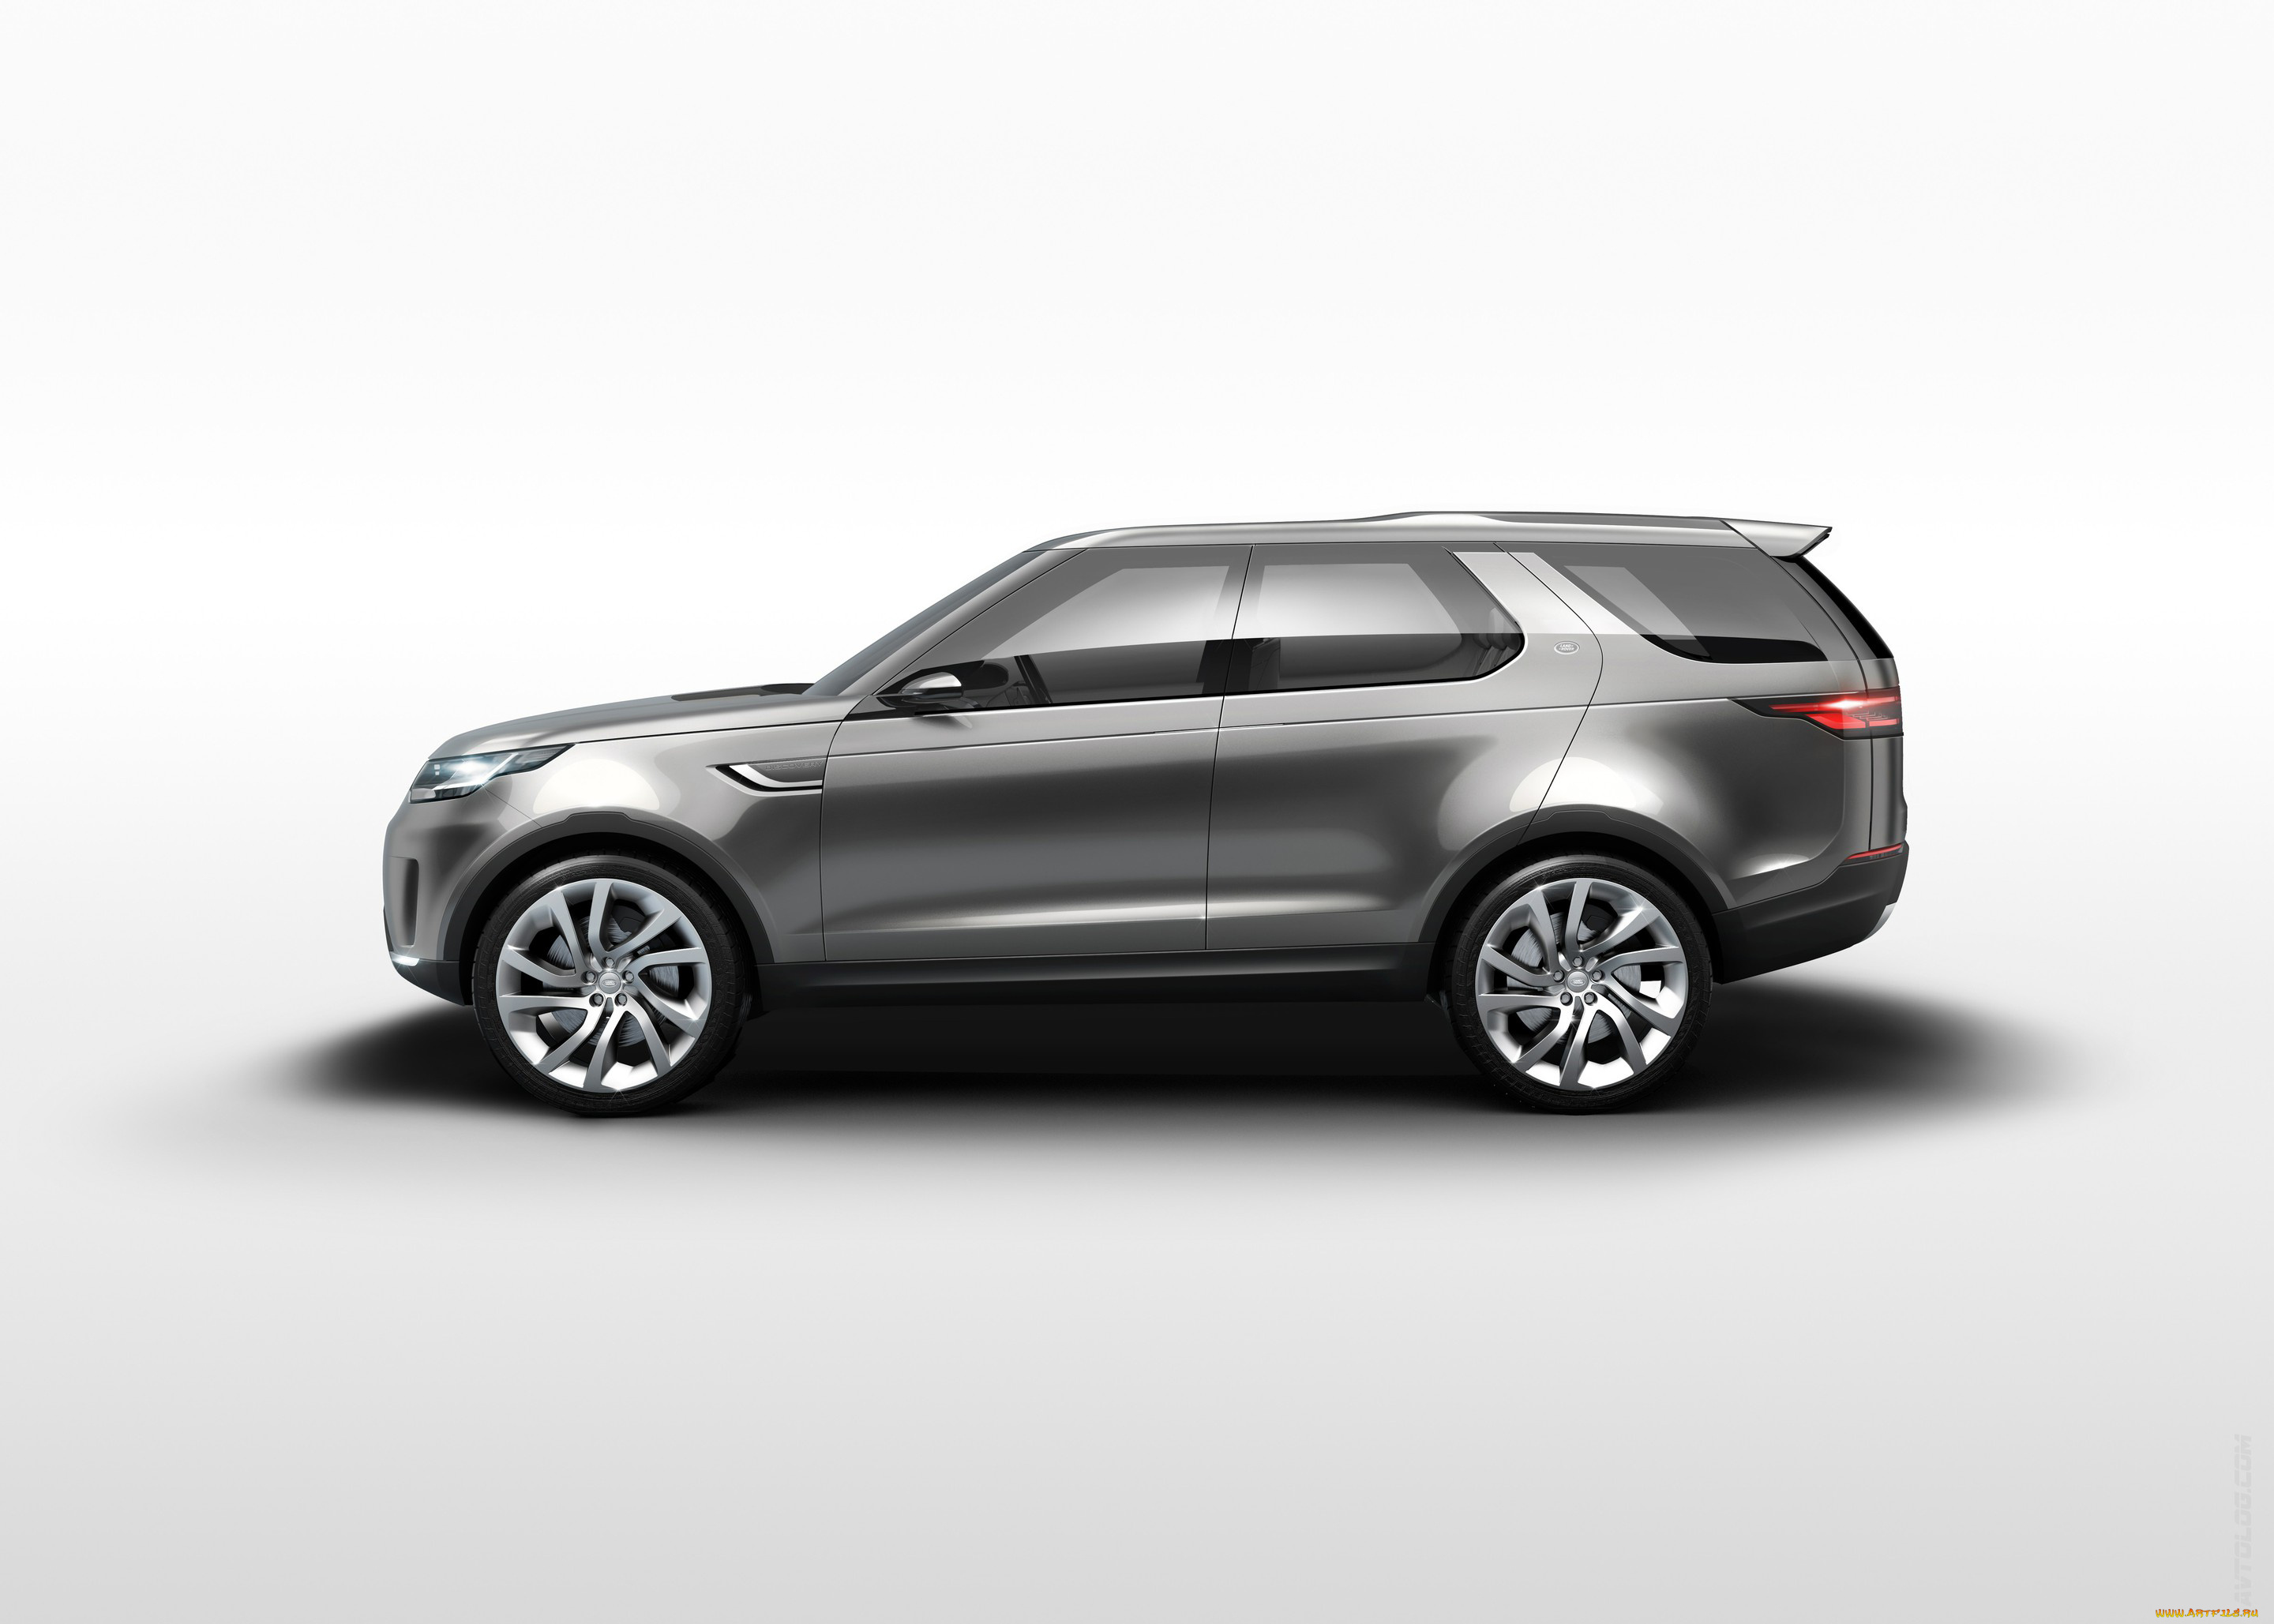 land-rover, discovery, vision, concept, 2014, автомобили, 3д, land-rover, discovery, vision, concept, 2014, 3d